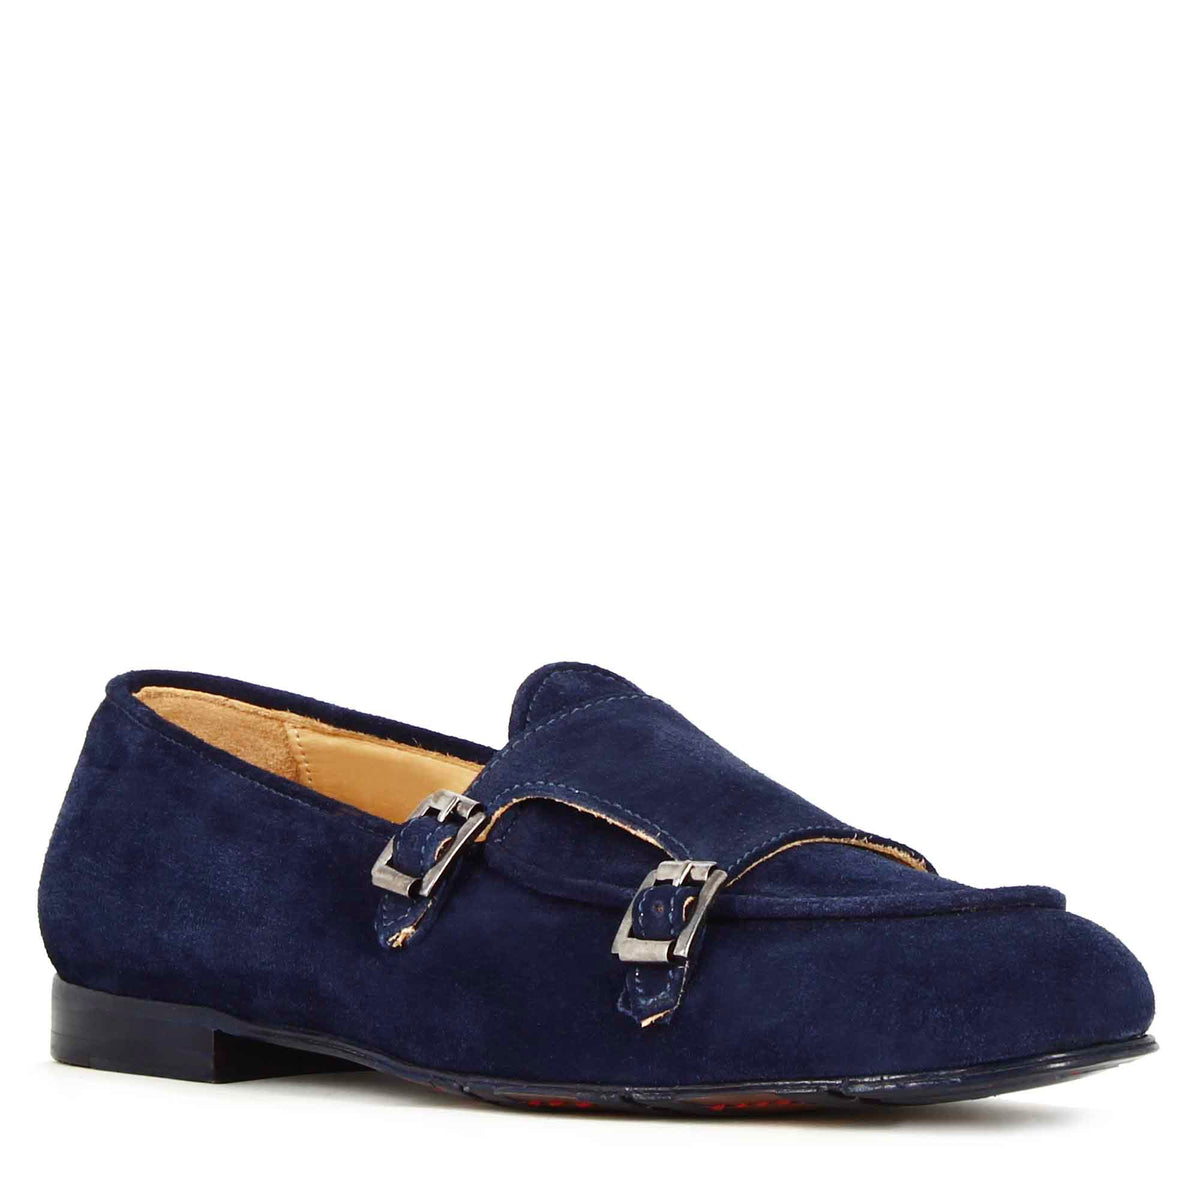 Men's moccasin in blue suede with double buckle